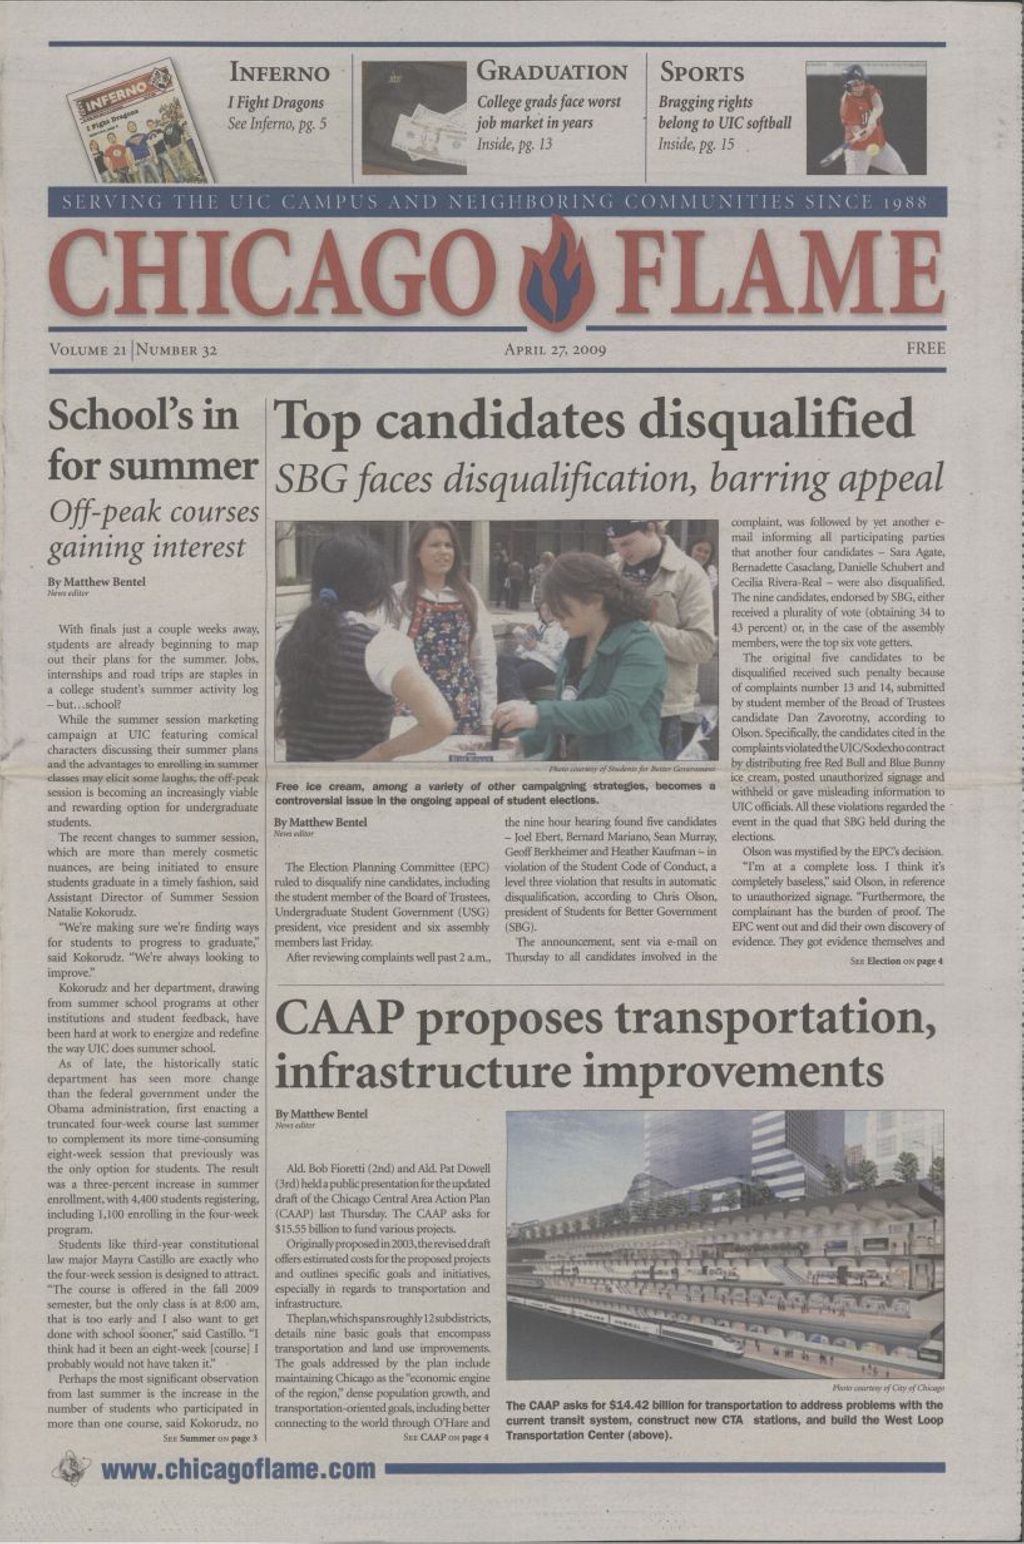 Miniature of Chicago Flame (April 27, 2009)